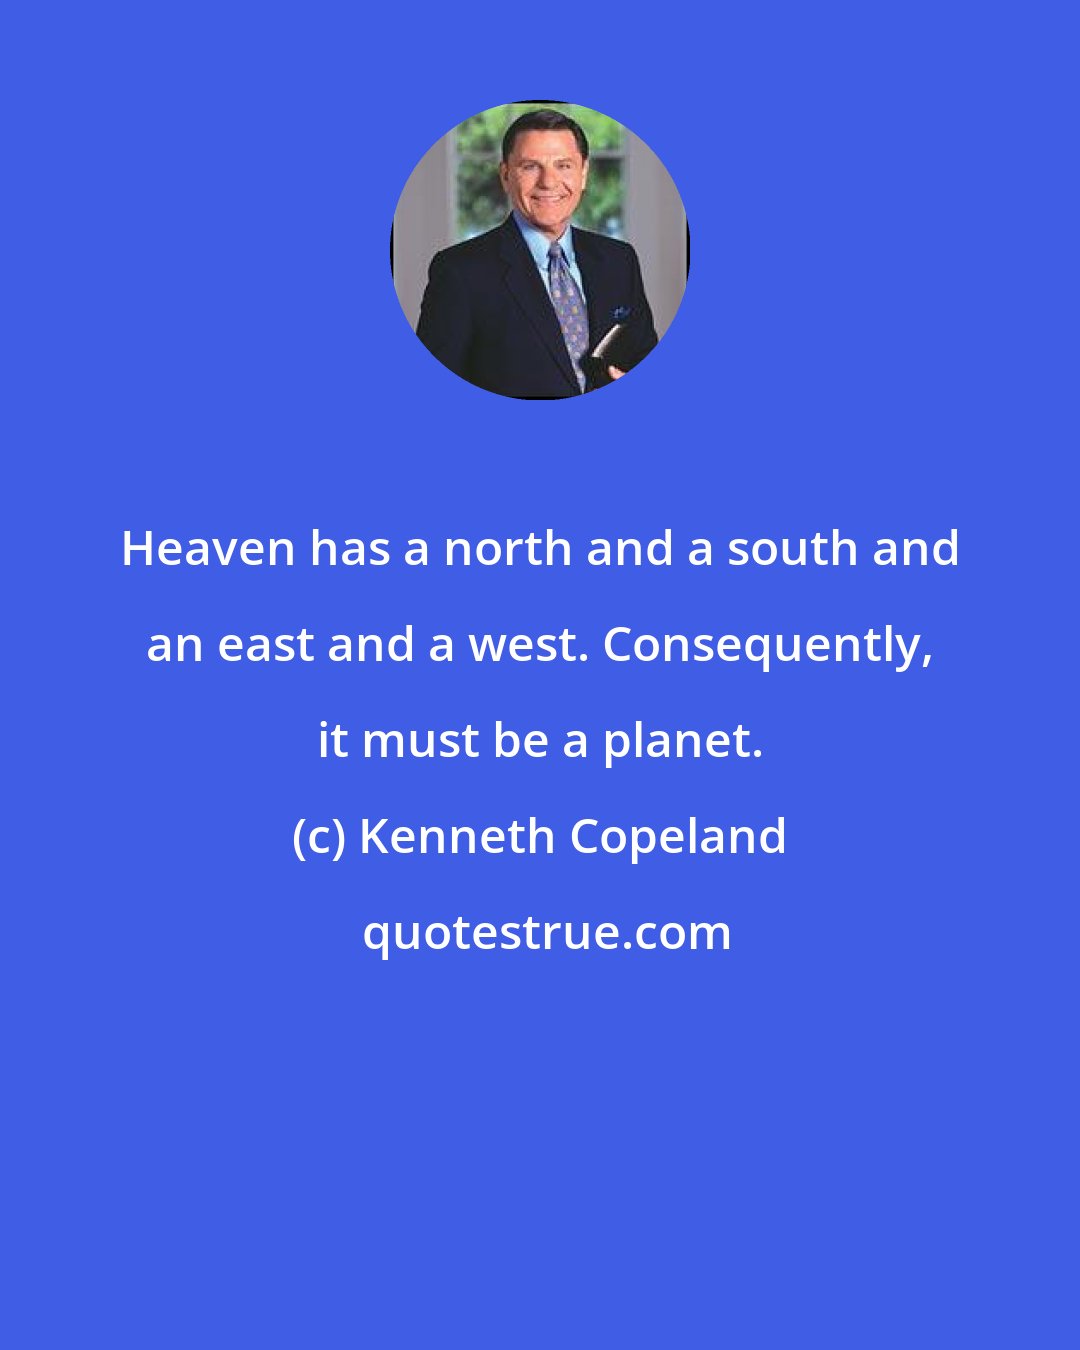 Kenneth Copeland: Heaven has a north and a south and an east and a west. Consequently, it must be a planet.